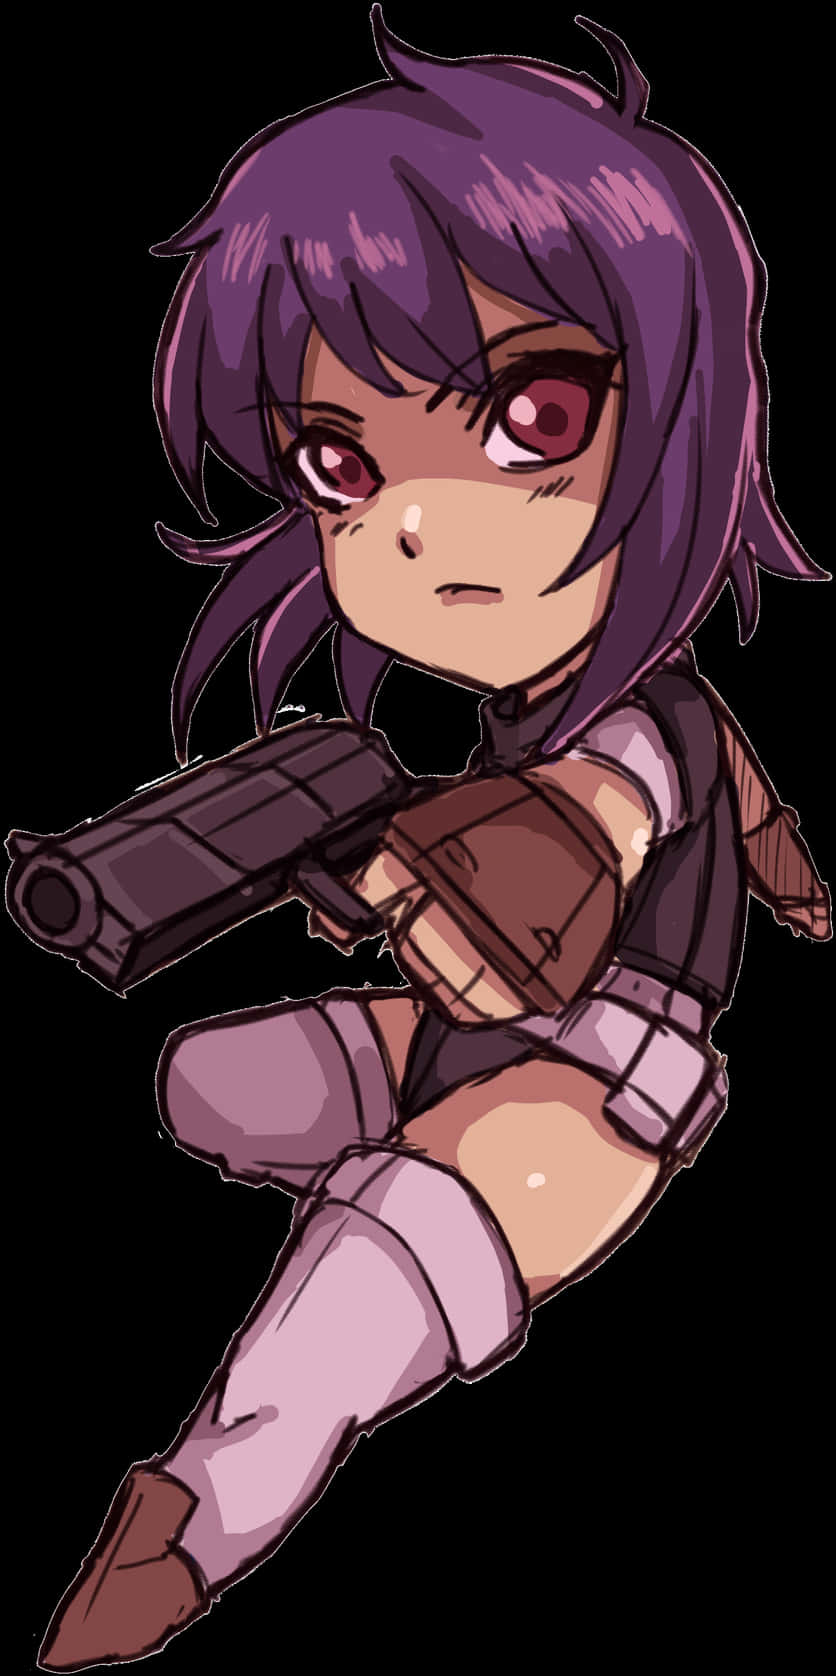 Animated Girl With Gun PNG